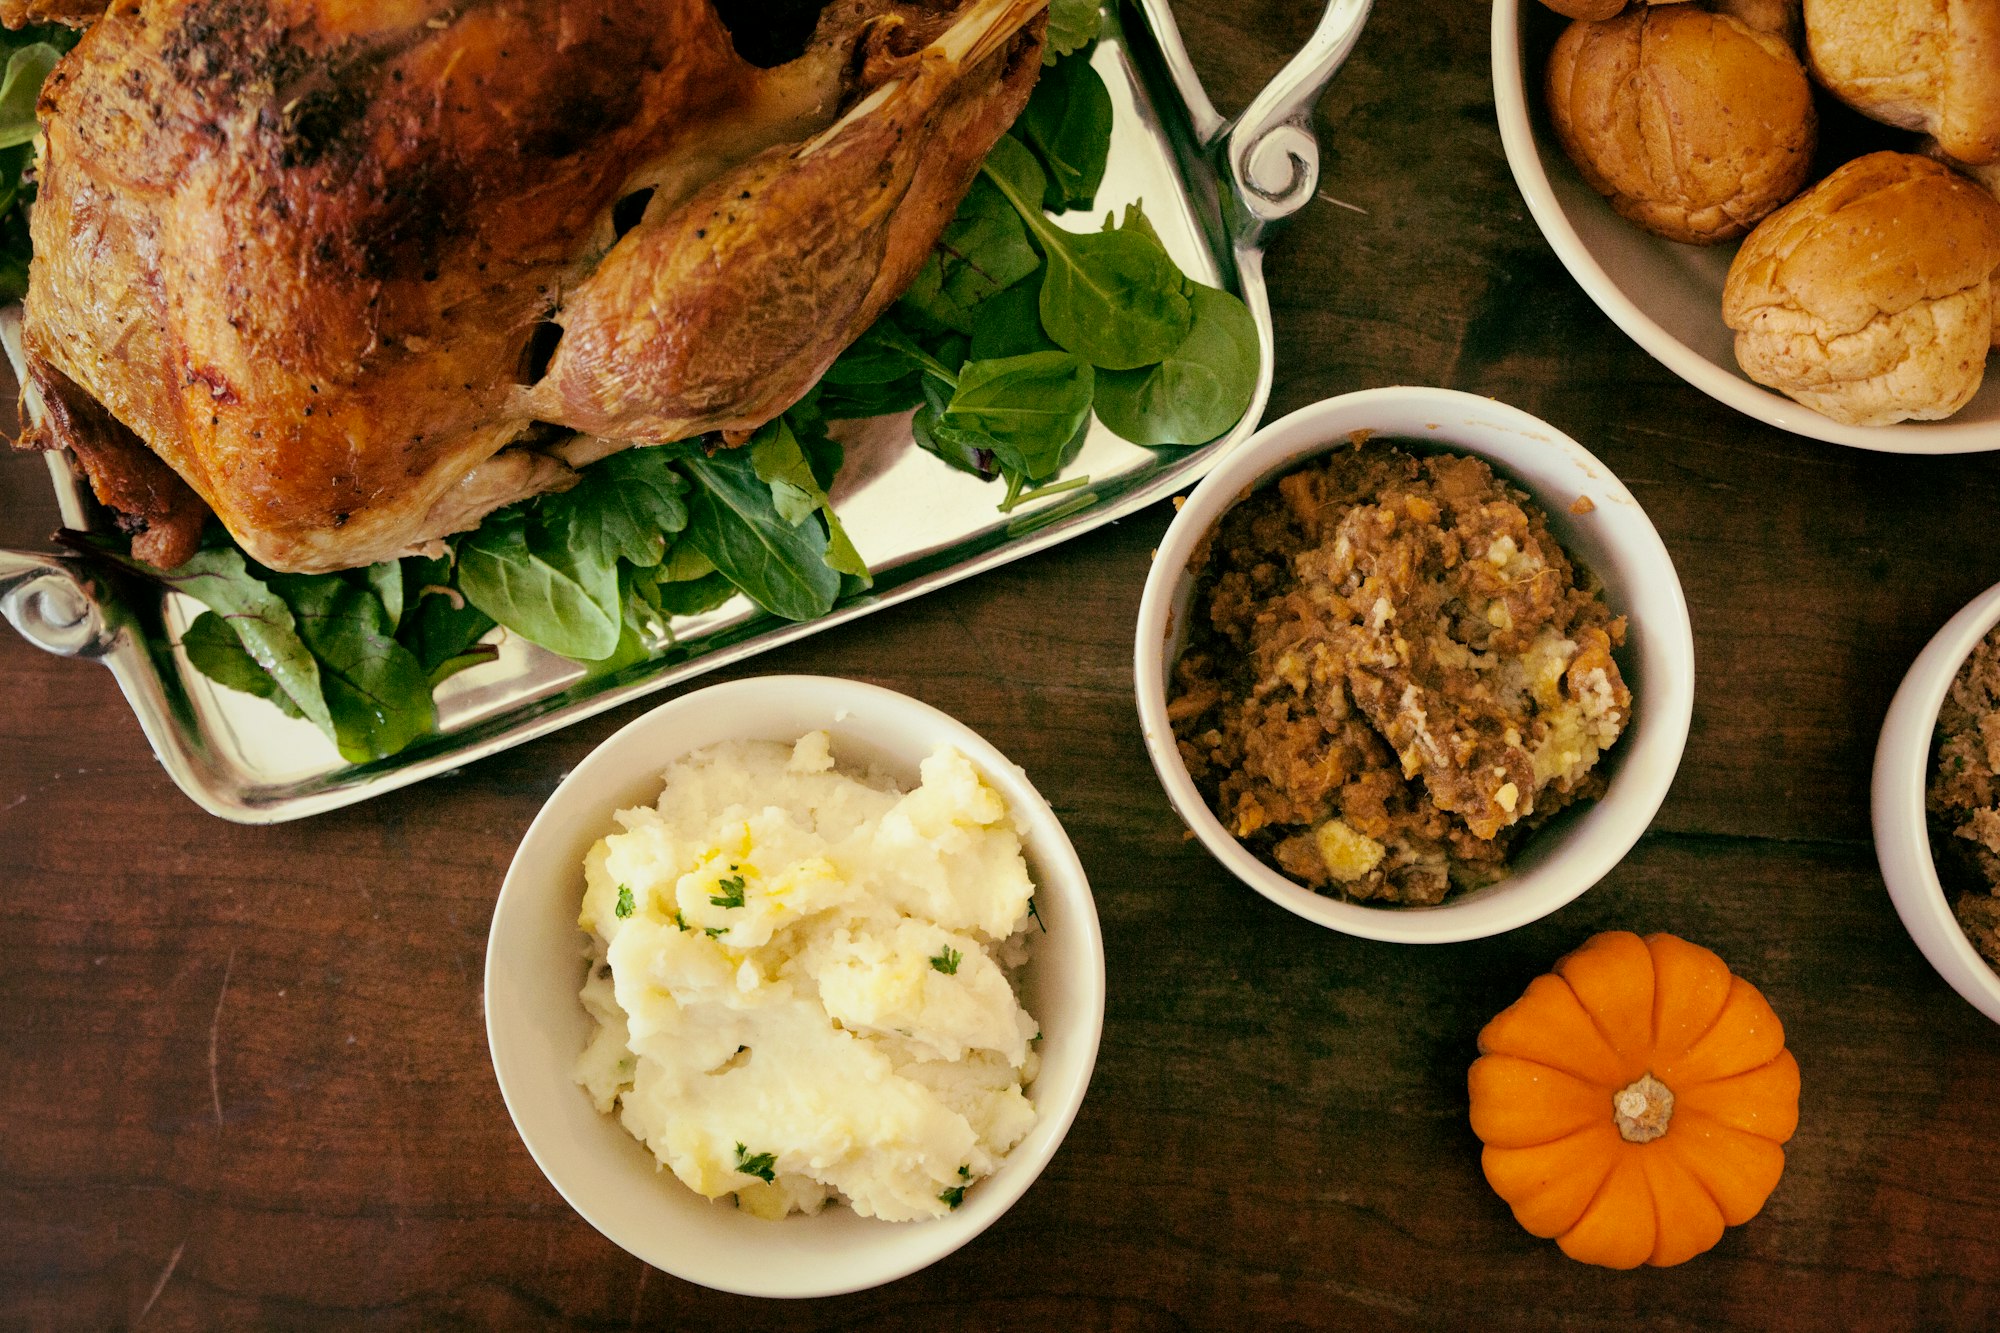 Are Less Americans Celebrating Thanksgiving?